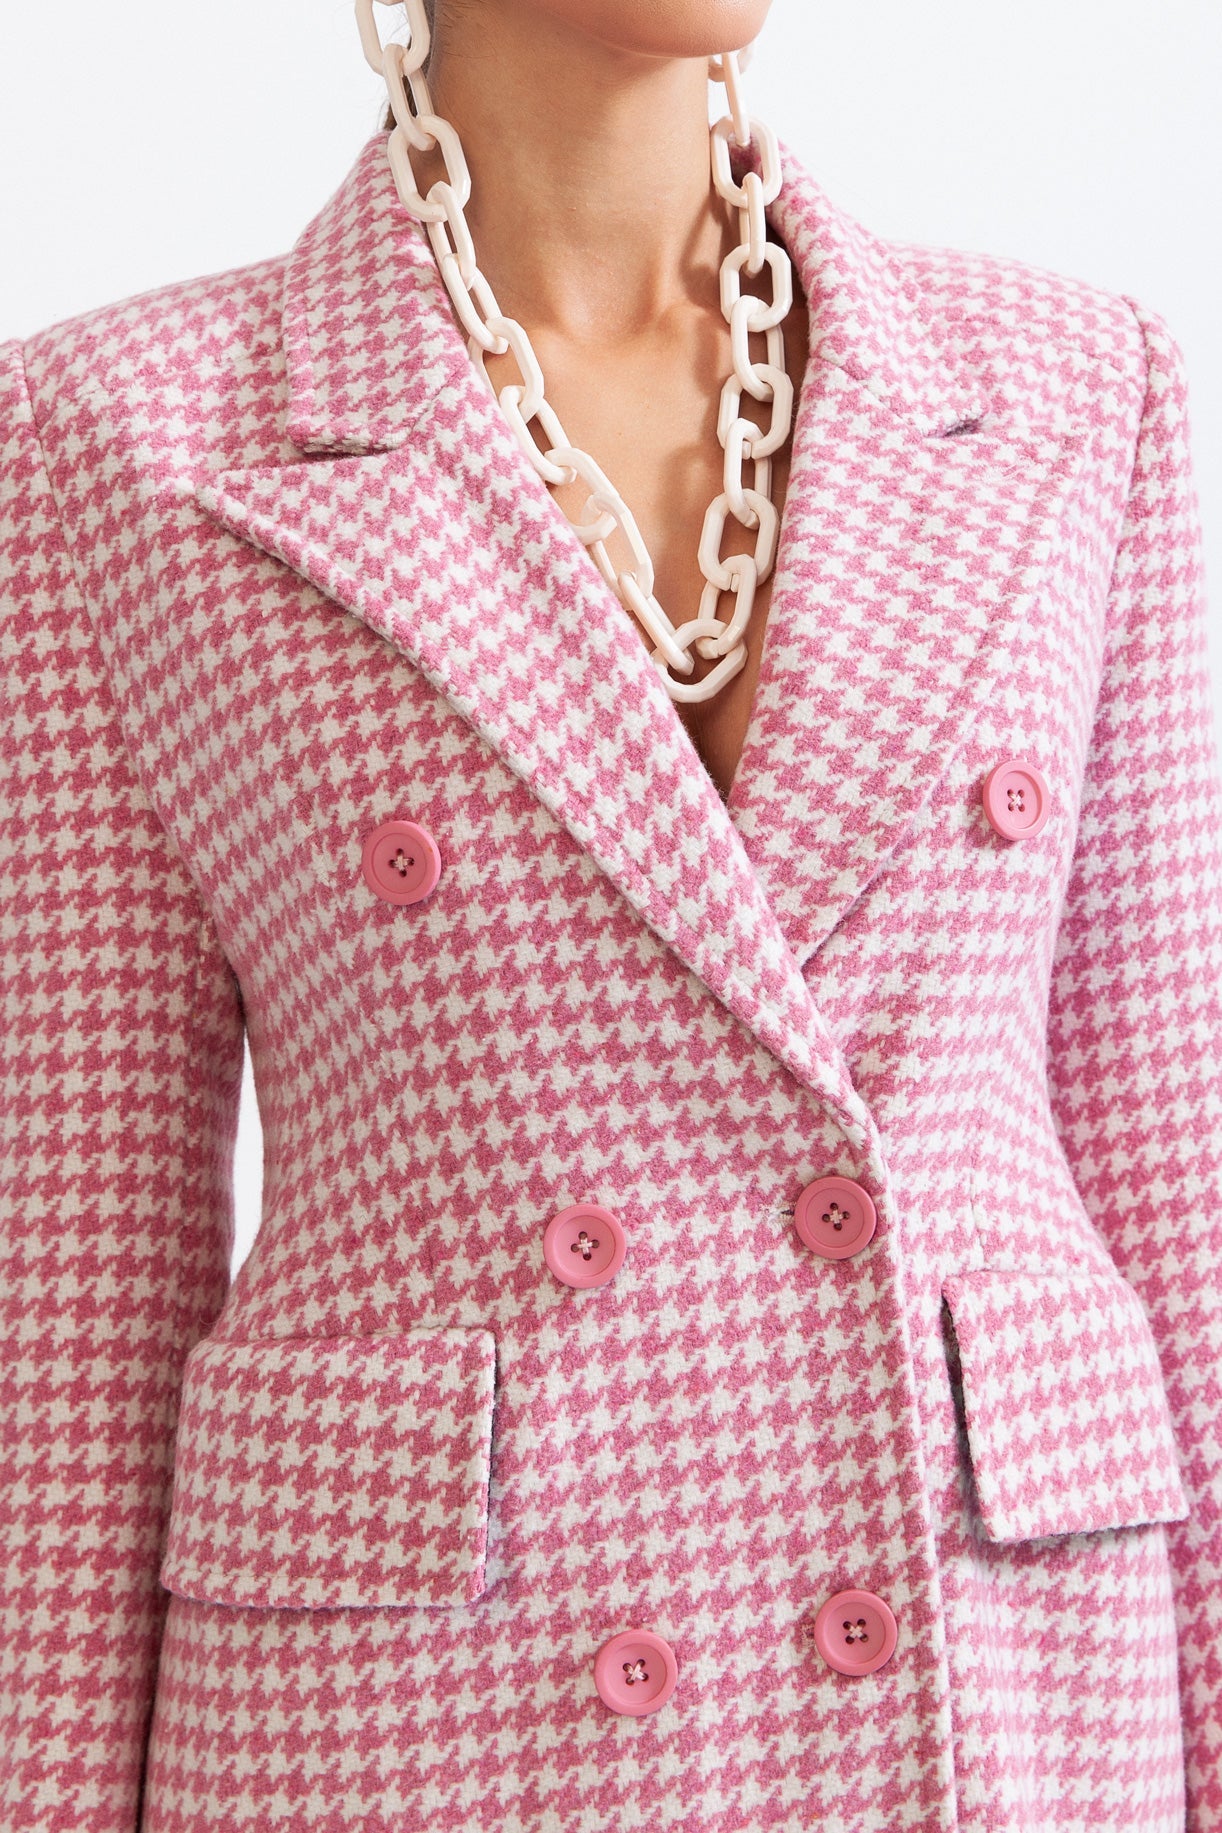 LUNA Houndstooth Coat with Pointed Shoulders - Pink